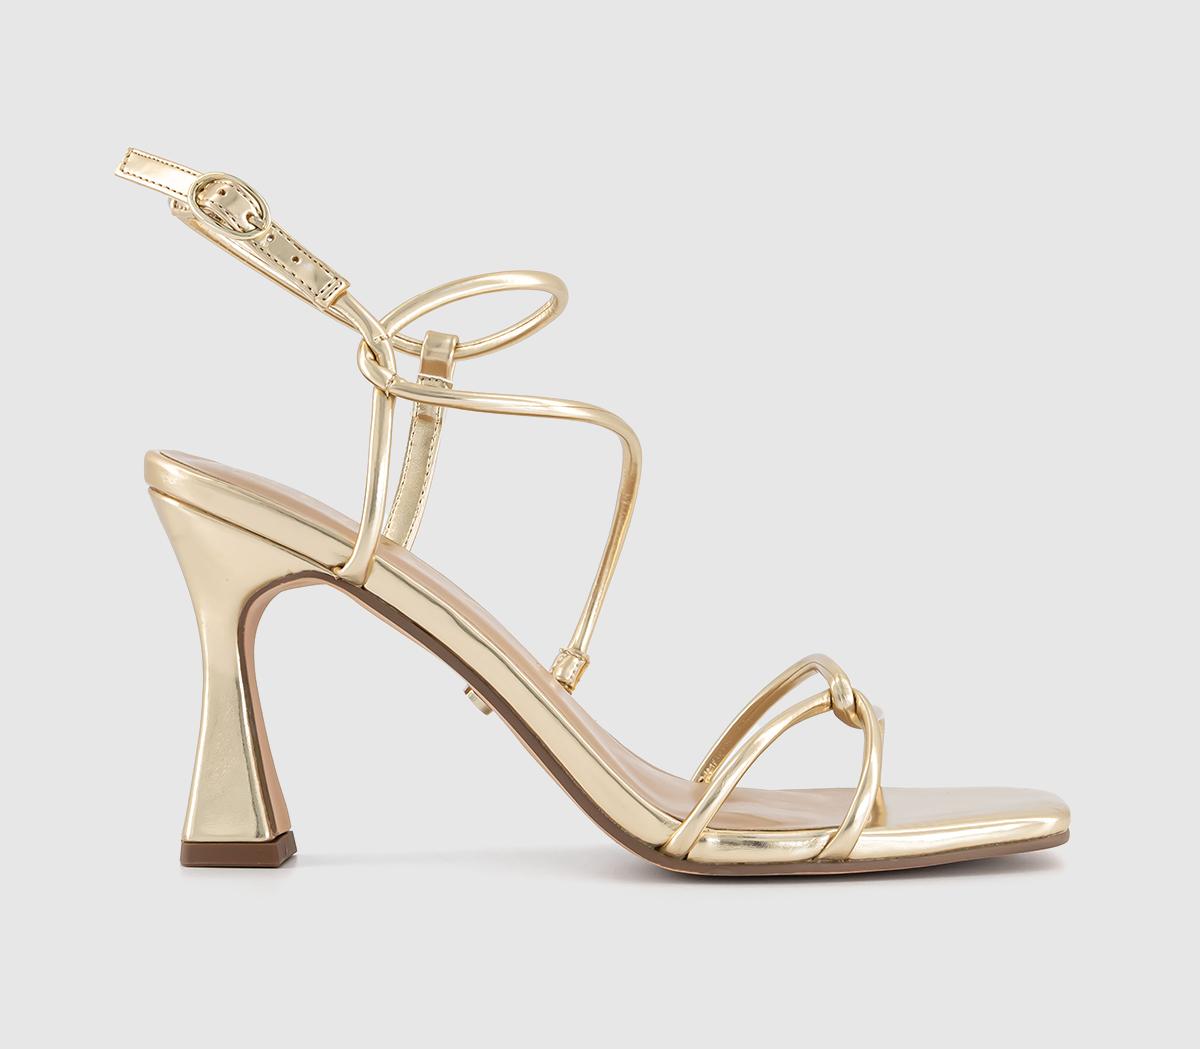 OFFICEMagic Strappy Heeled SandalsGold